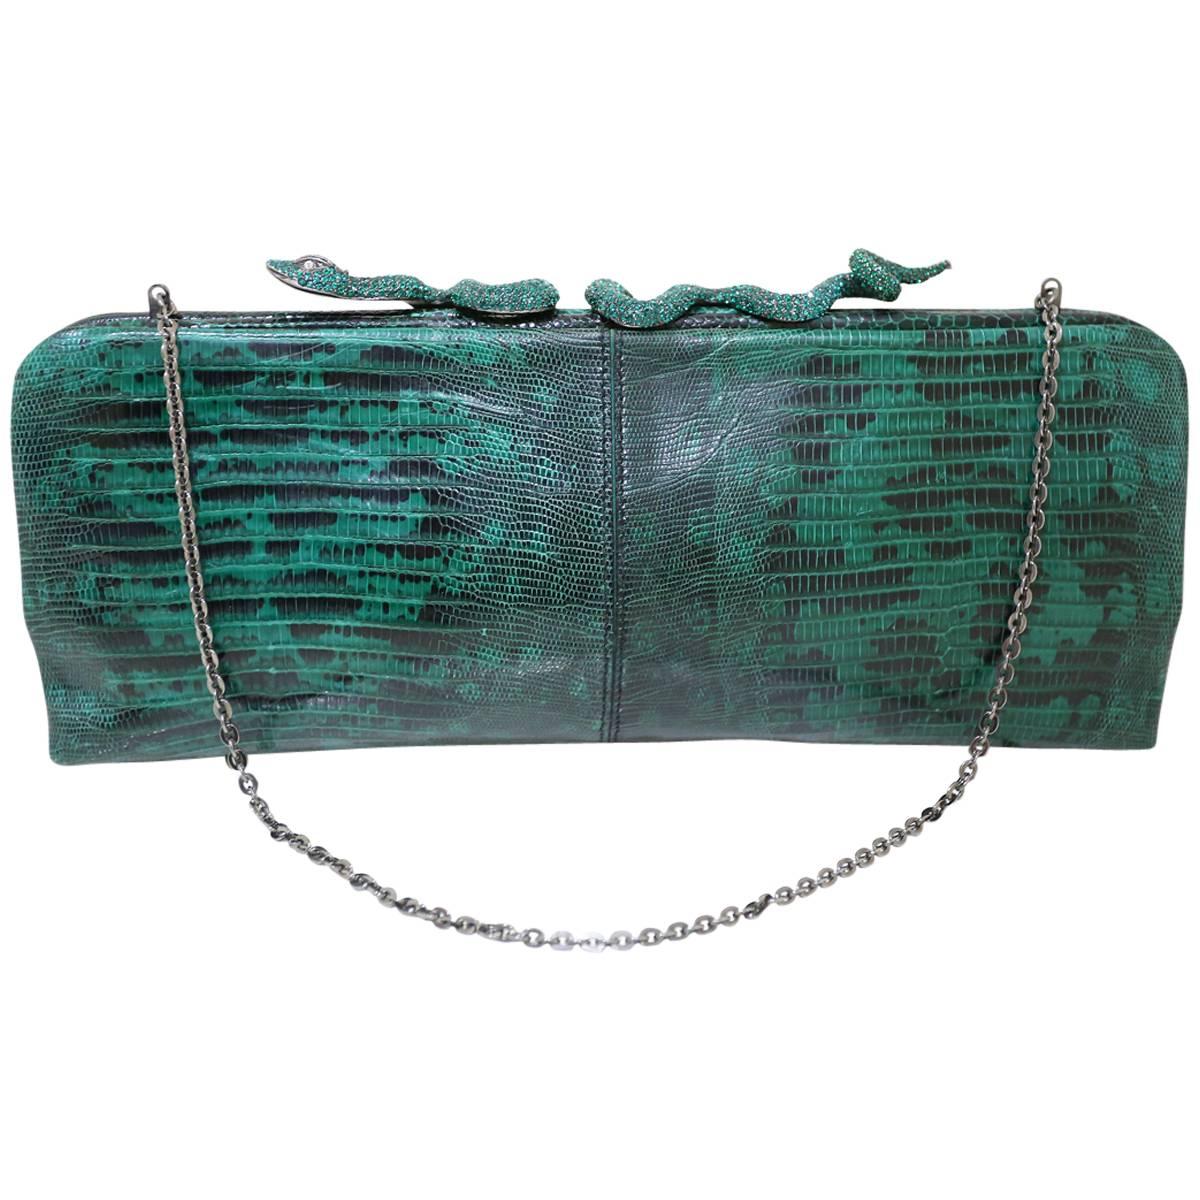 Valentino lizard skin evening bag/clutch with encrusted crystal snake closure